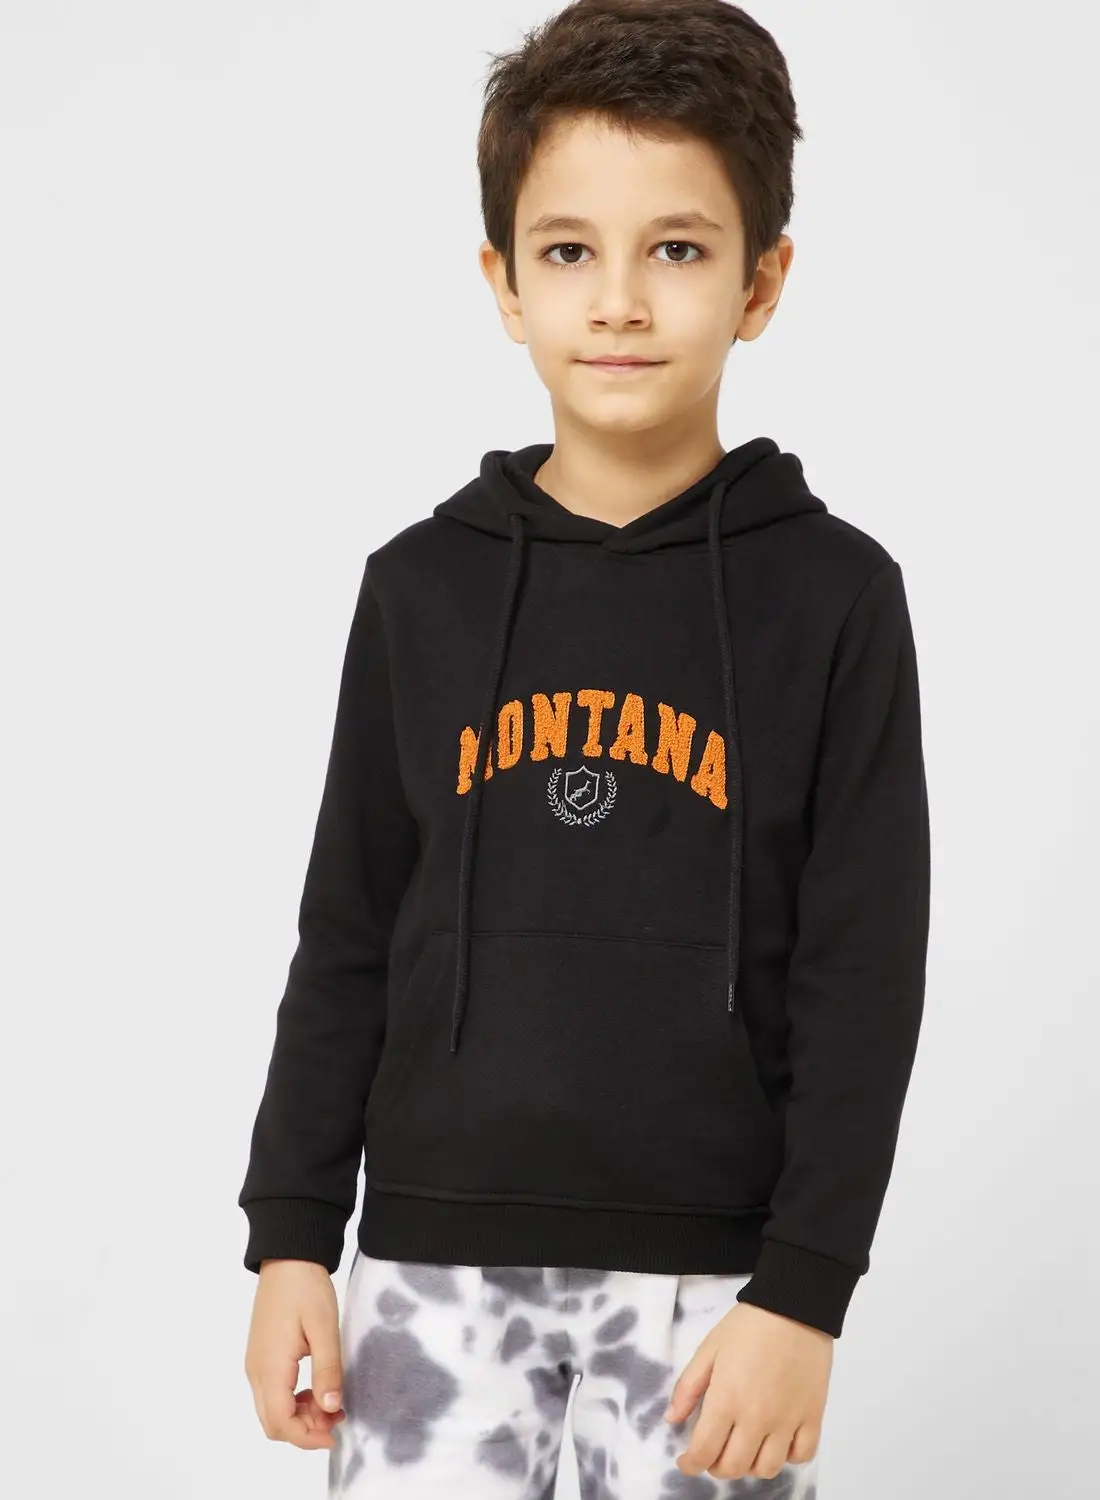 Pinata Chillie Embroidered Hoodie For Boys